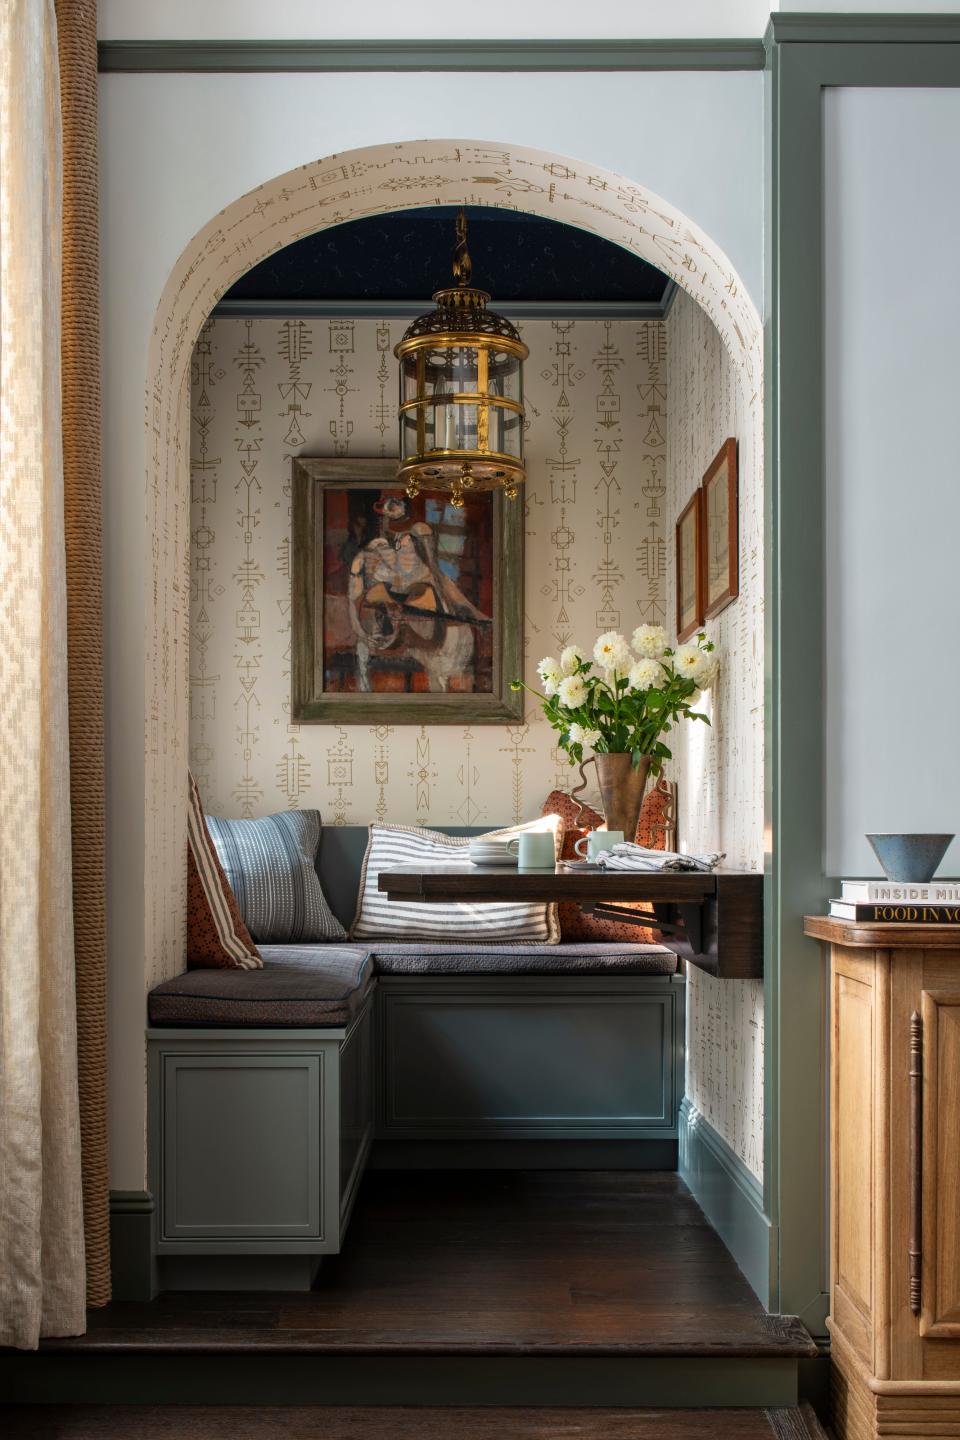 AFTER: The updated dining alcove stars an upholstered banquette, a vintage chandelier, and characterful artworks including a circa 1957 painting by George Ratkai displayed front and center. True to her signature, Louise left no surface bare, not even the arched entrance or the wall behind it, which she outfitted in a Pierre Frey wallpaper.